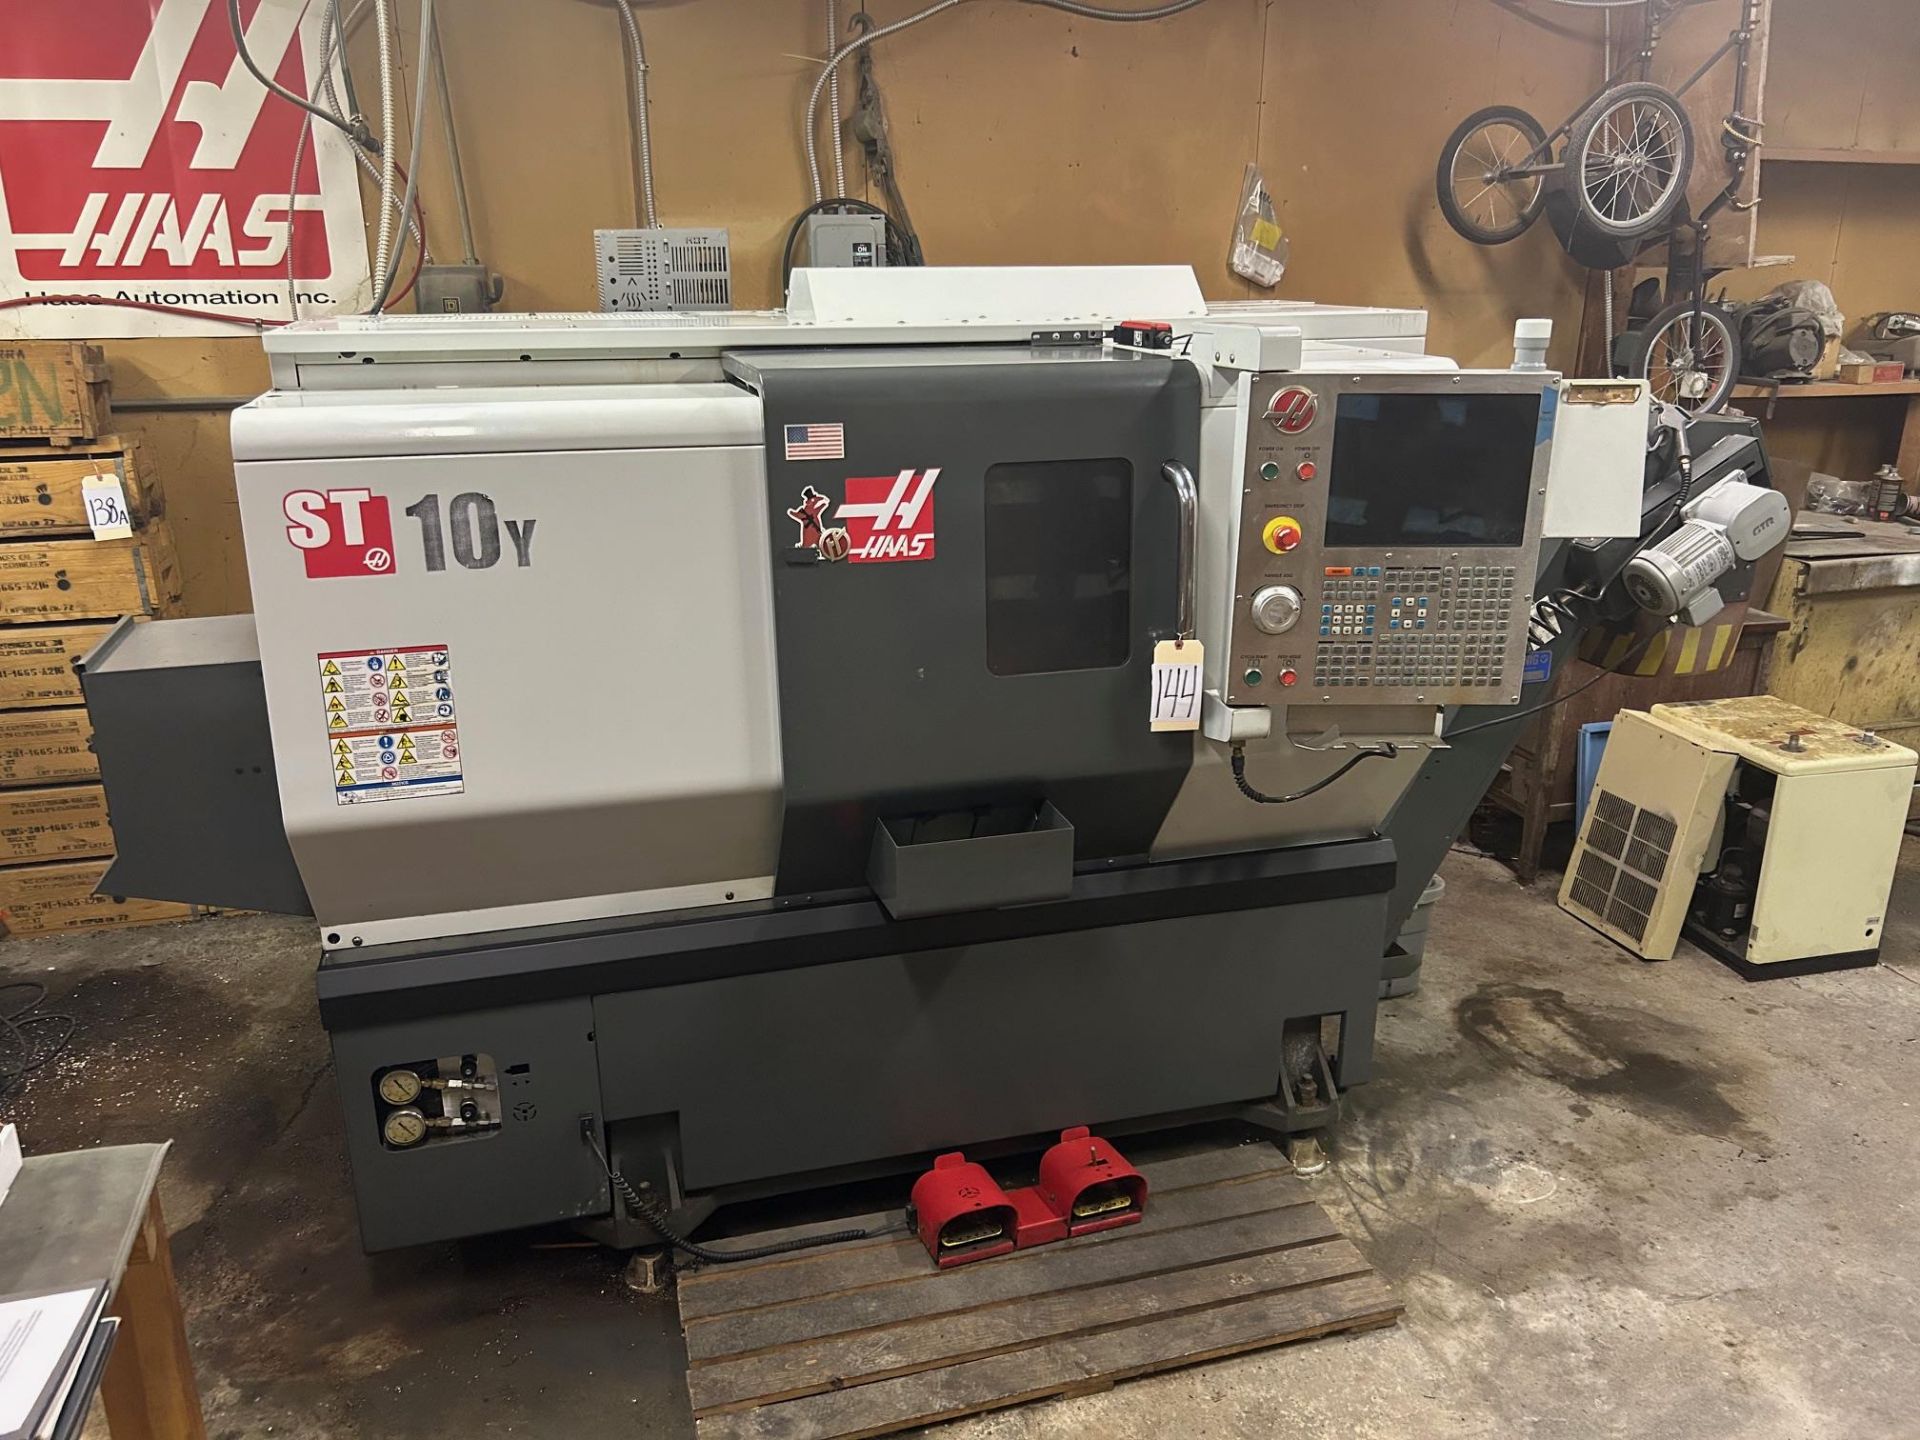 Haas ST-10Y CNC Lathe, (2013) SN: 3095763, Live Tooling, Hennig Chip Conveyor, Model: 30-5494B, incl - Image 13 of 32